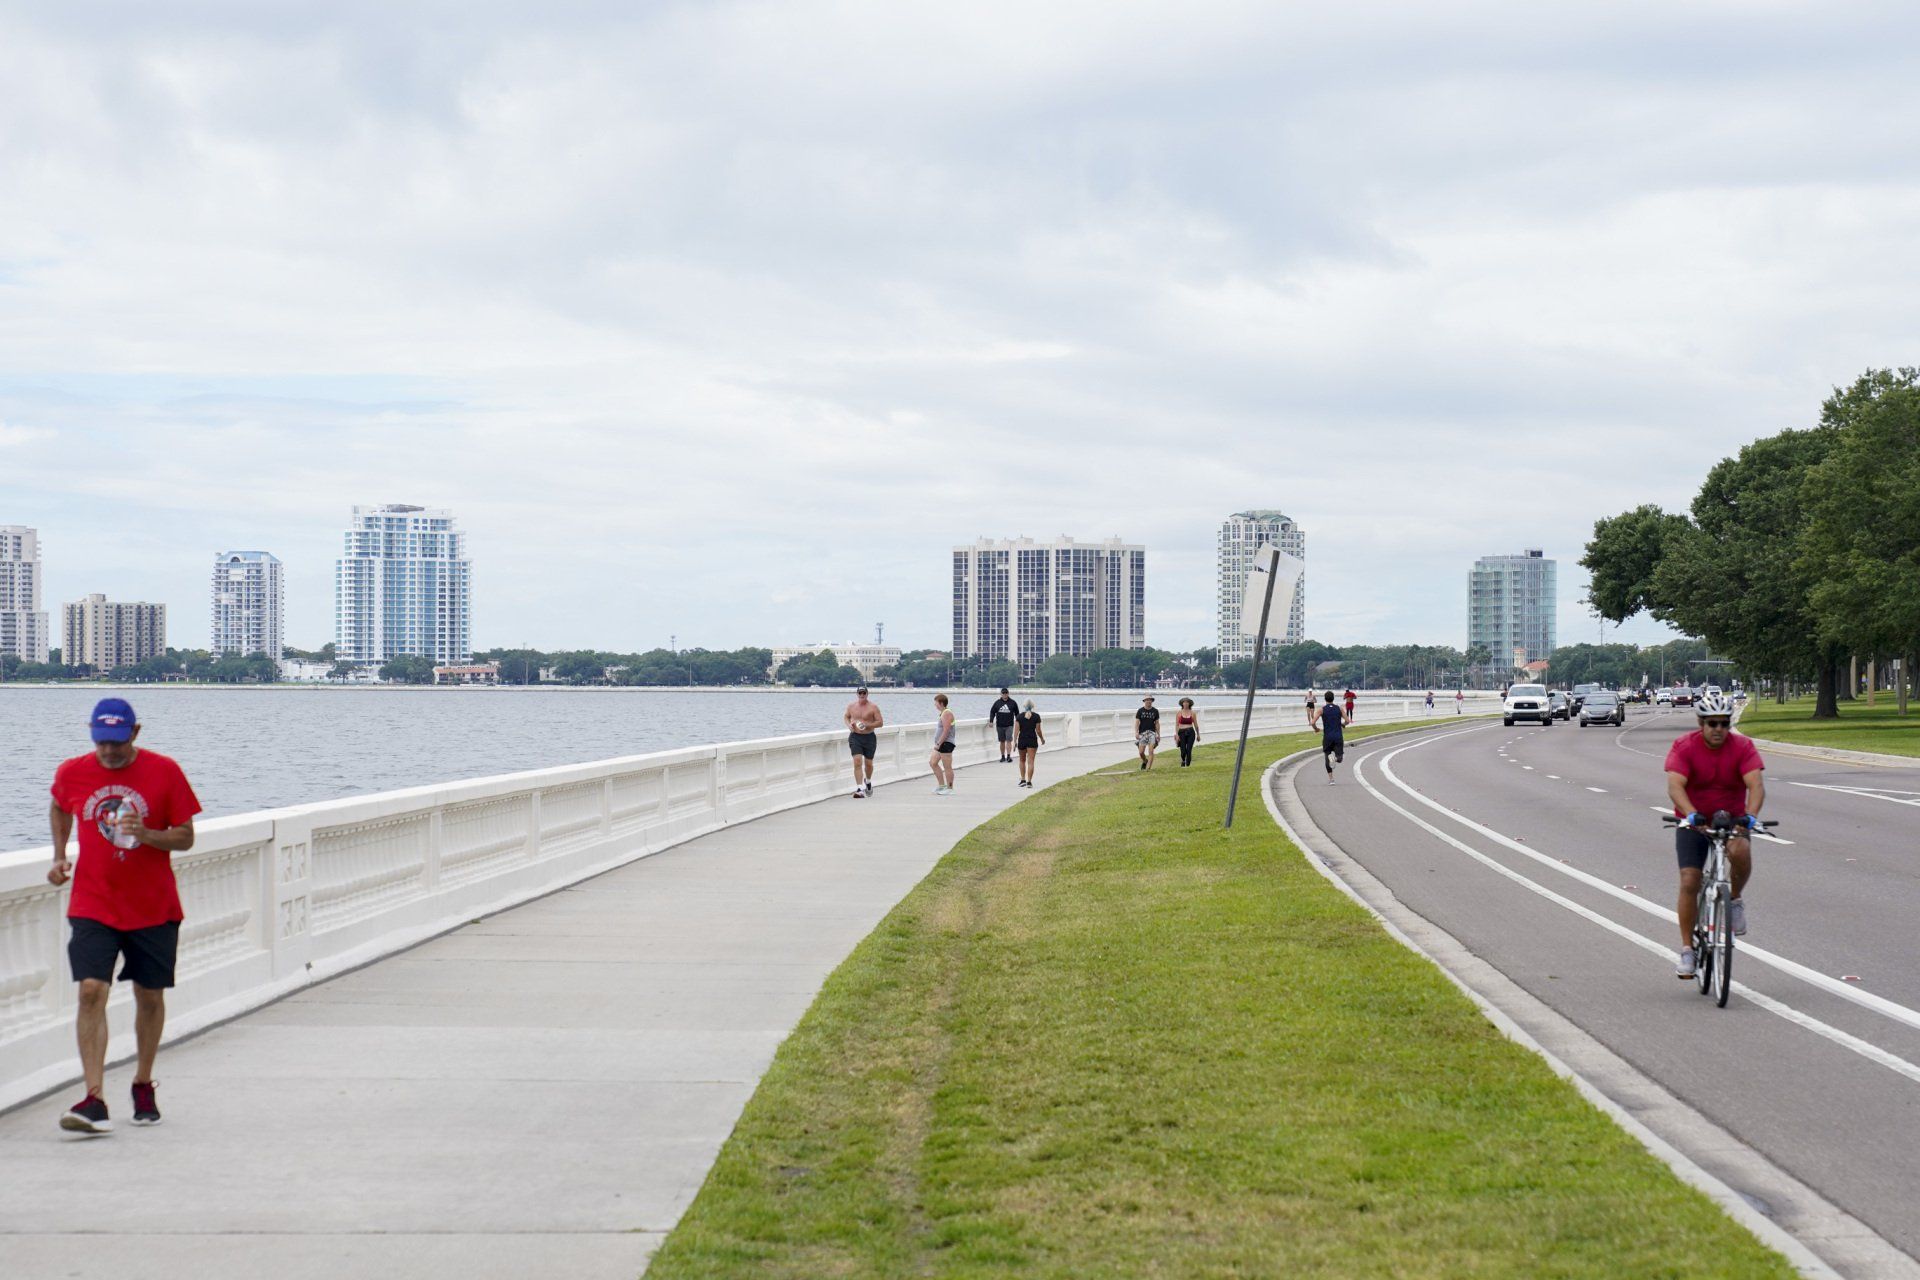 World's Longest Continuous Sidewalk: world record in Tampa, Florida